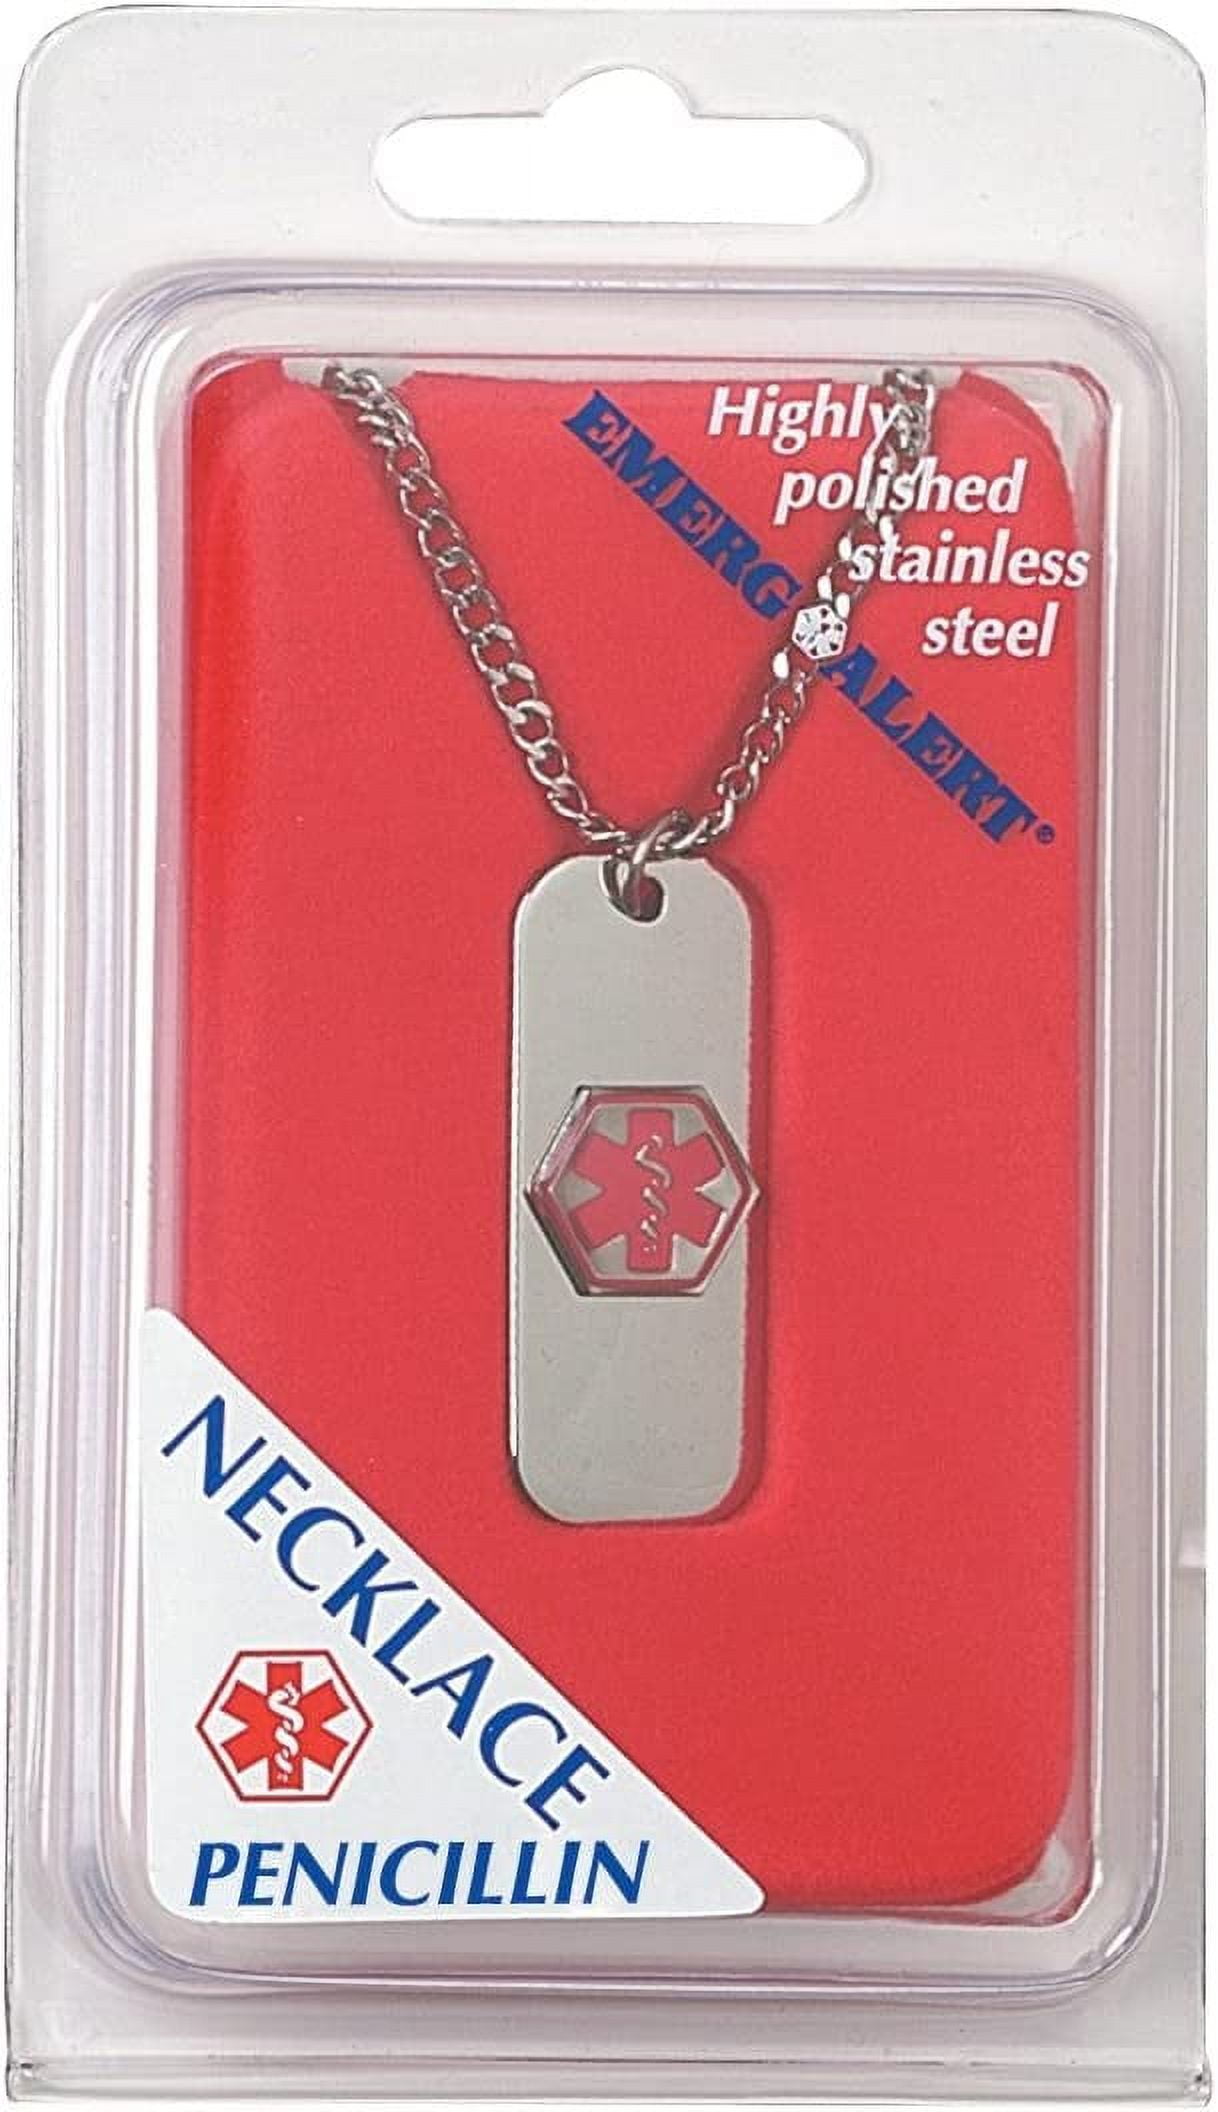 Penicillin Allergy Necklace Raised Medical Alert Symbol Easy to Identify Polished Stainless Steel 0aae4dac 3760 4548 a15c 3024aefcb258.bcf11a8f8c56c3305b7737d2f7d533eb